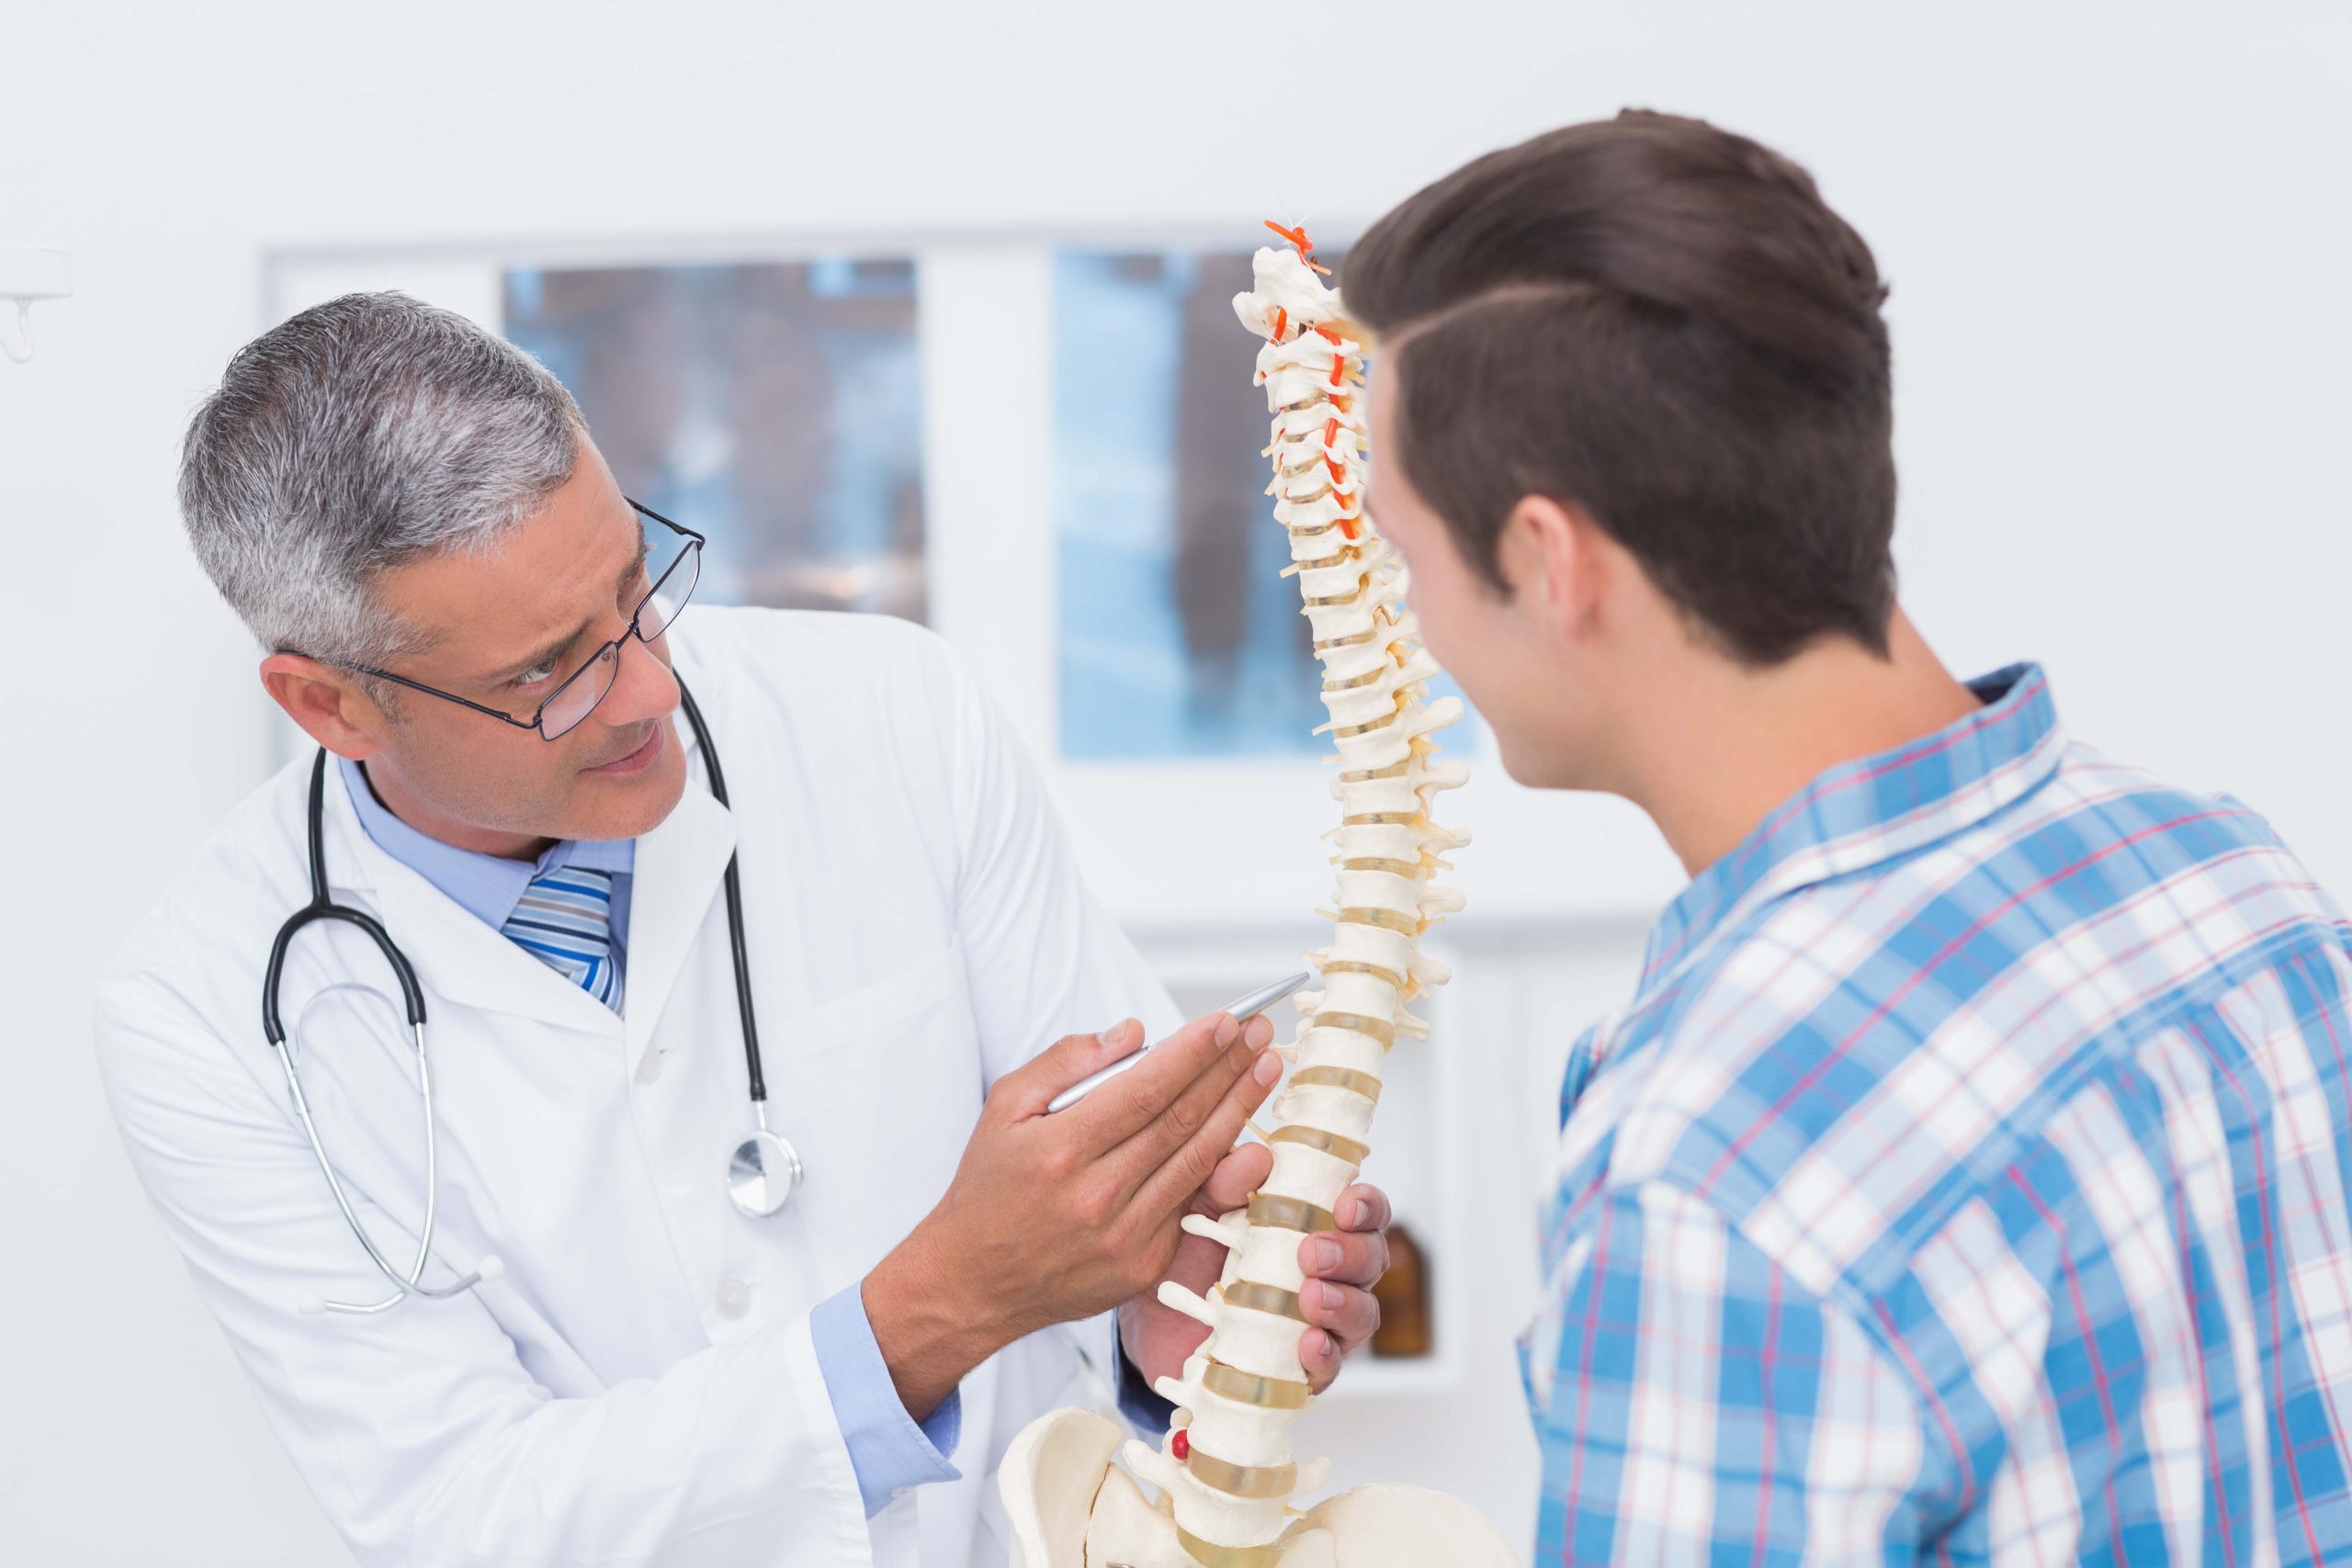 Who Can Benefit From Seeing A Pain Management Specialist?